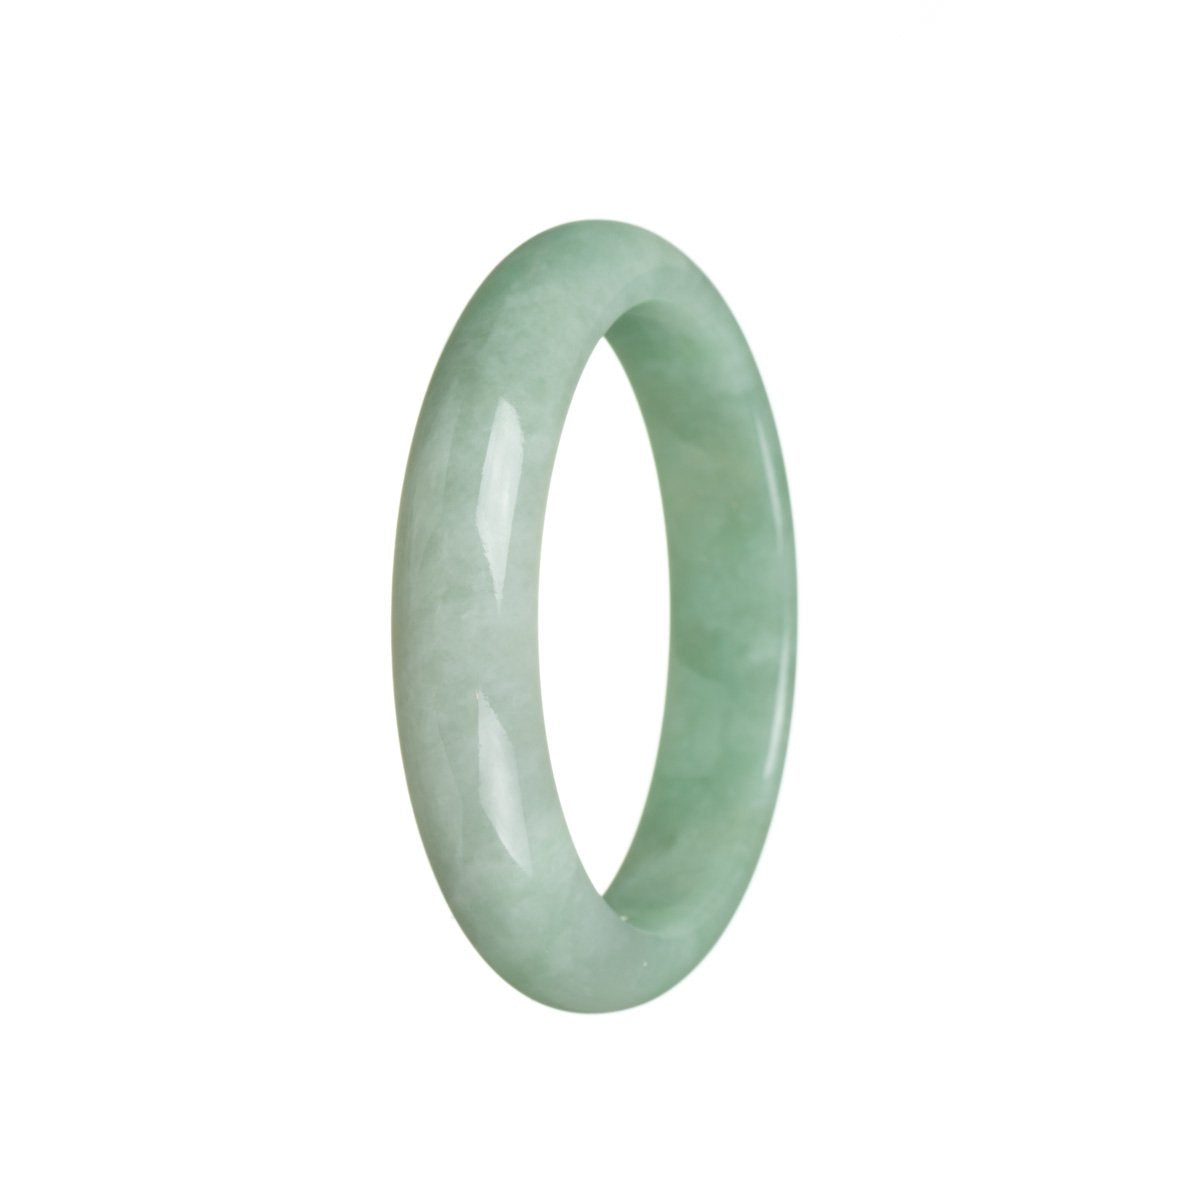 A close-up image of a half moon-shaped green jade bracelet with a smooth and polished surface. The bracelet is made from real natural green jade and measures 55mm in diameter. It is a beautiful and elegant piece of jewelry.